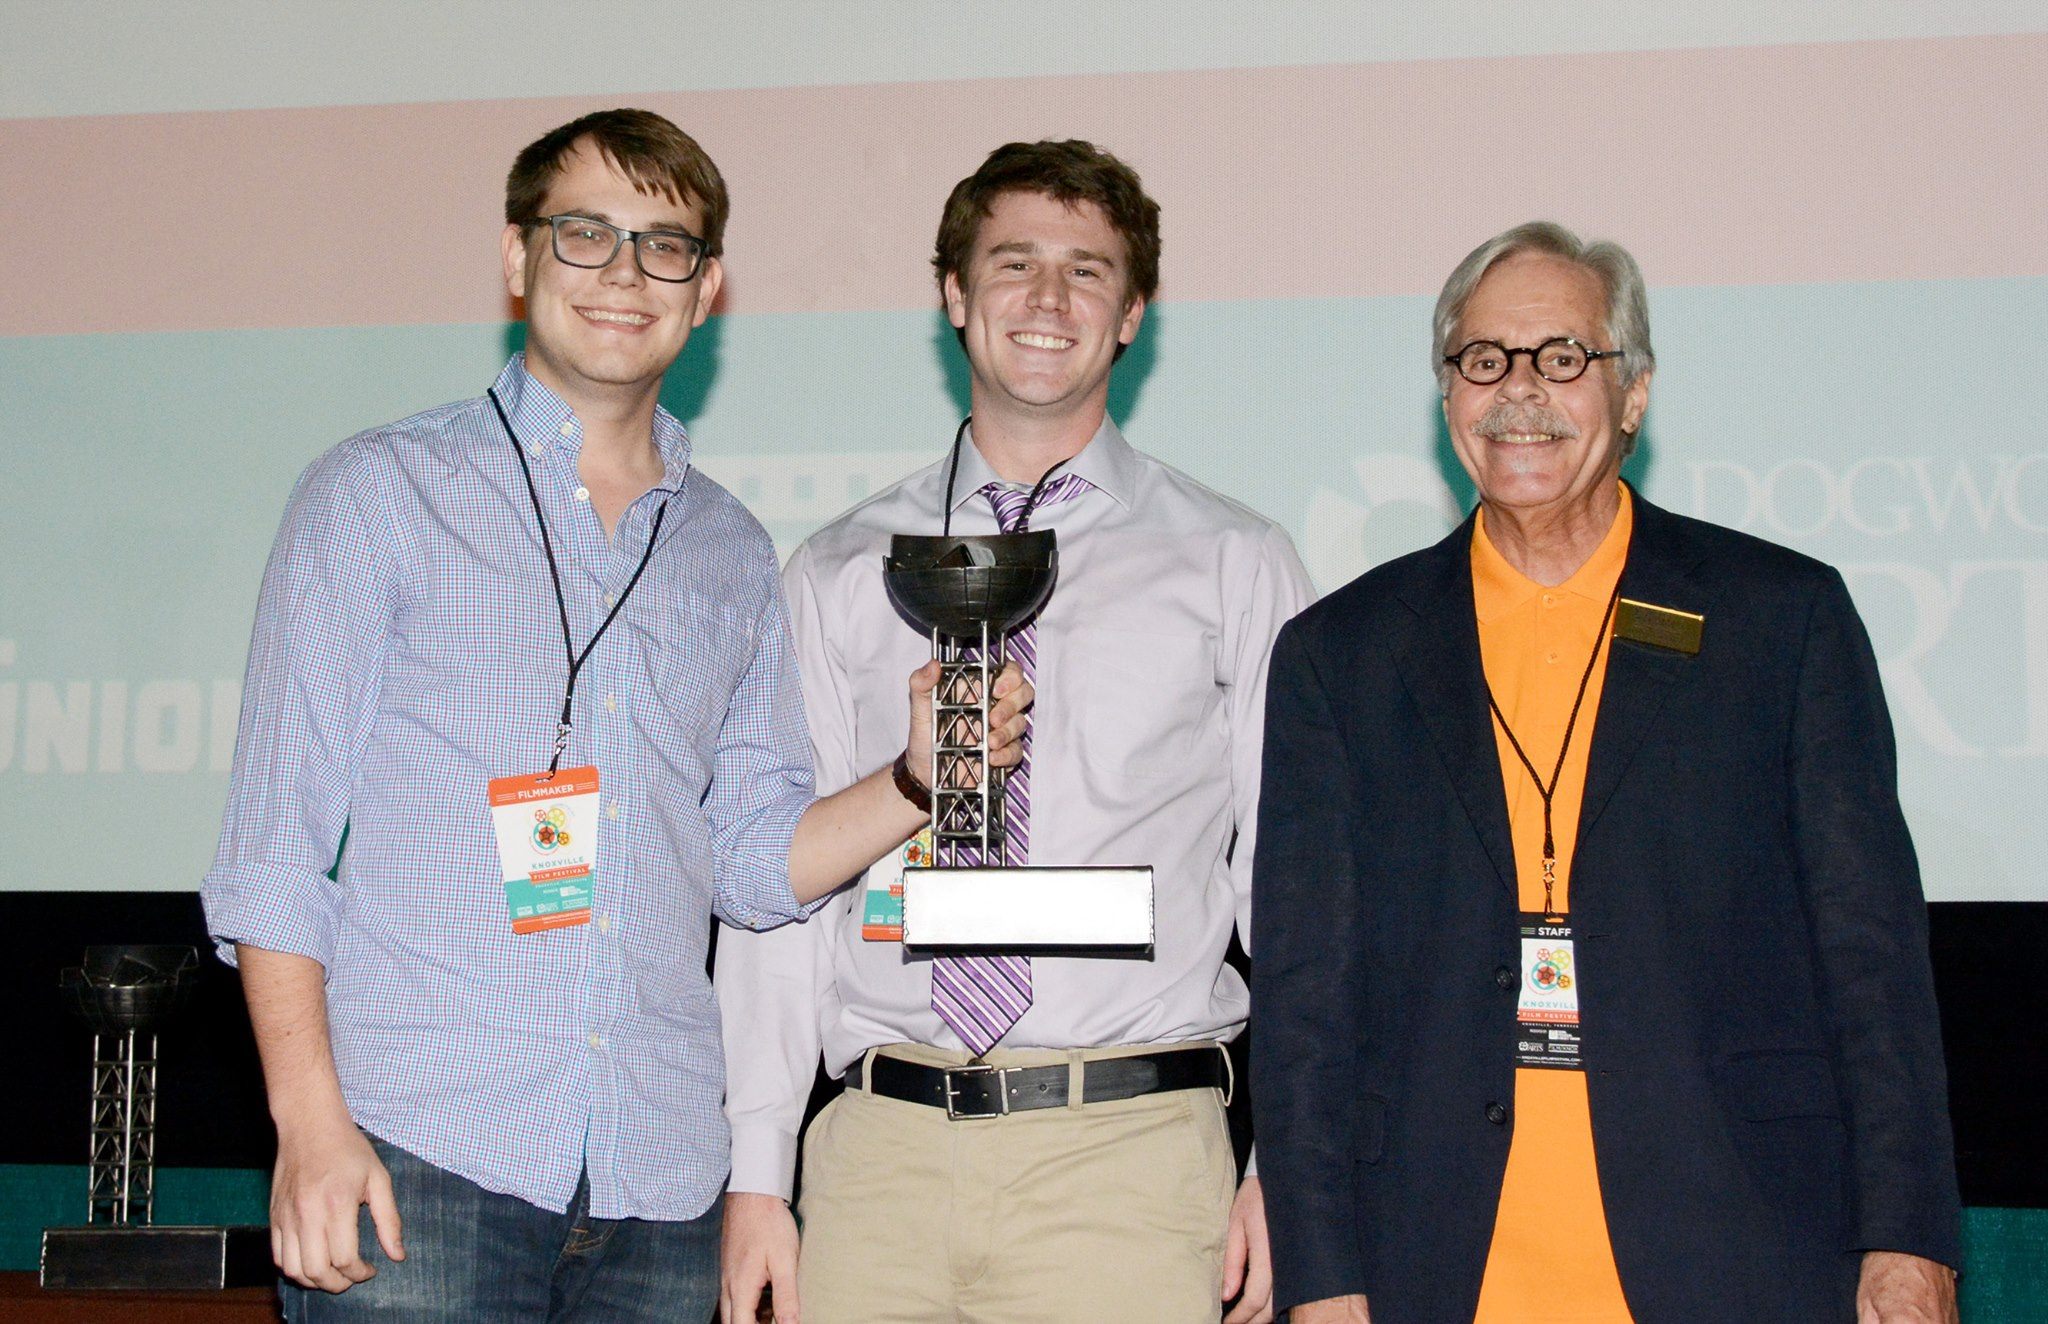 Won Best Tennessee Film at the Knoxville Film Festival